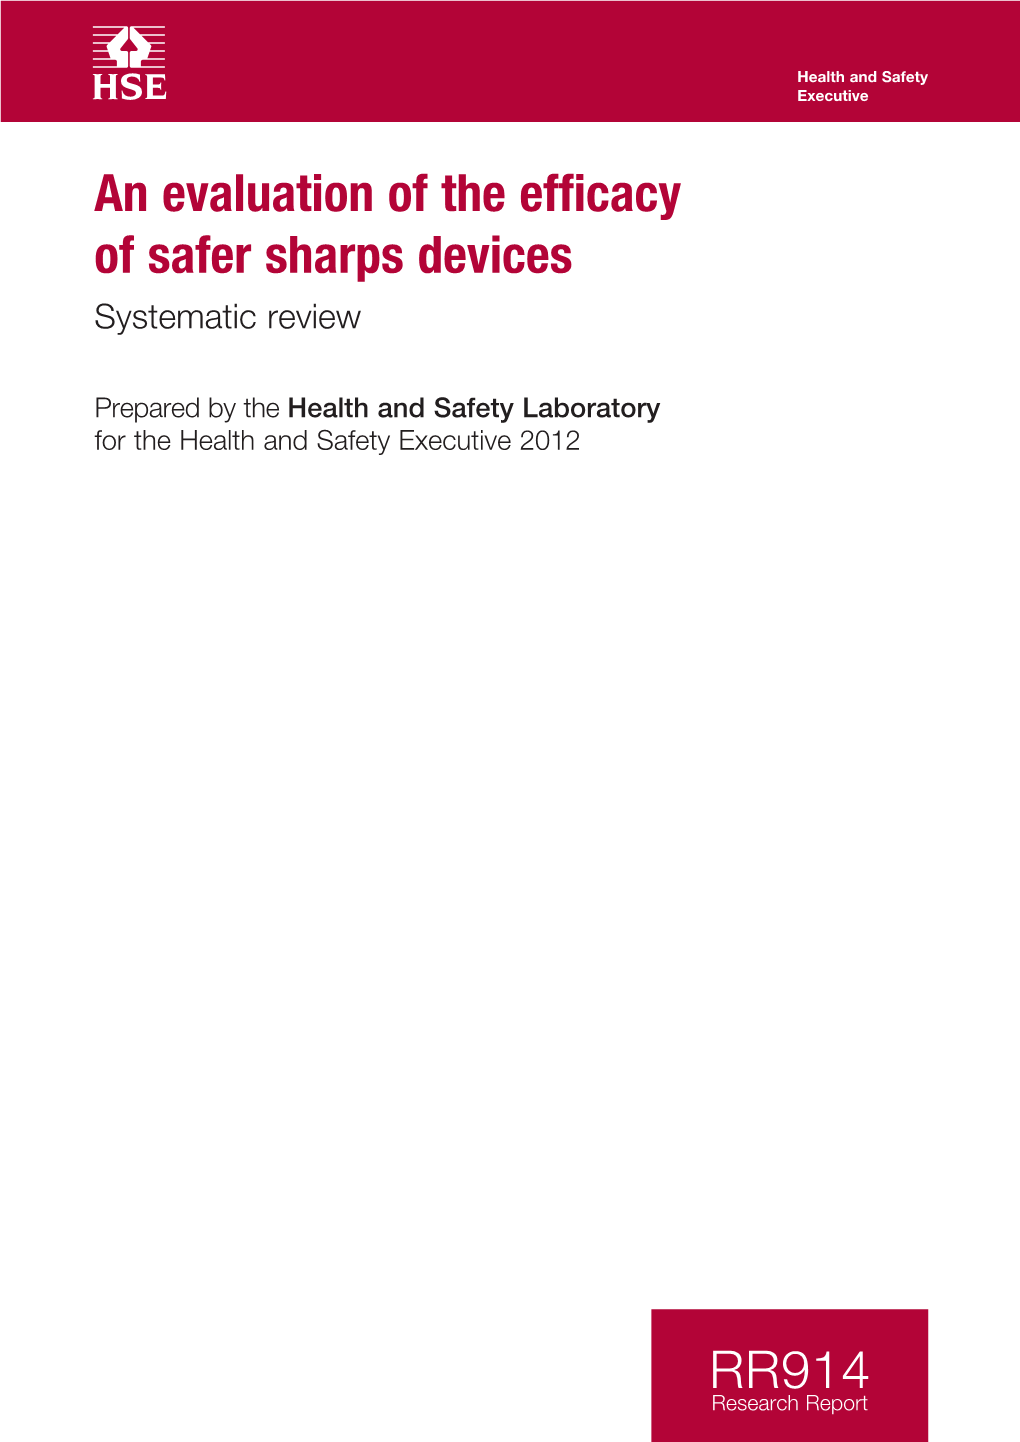 RR914 Research Report Health and Safety Executive